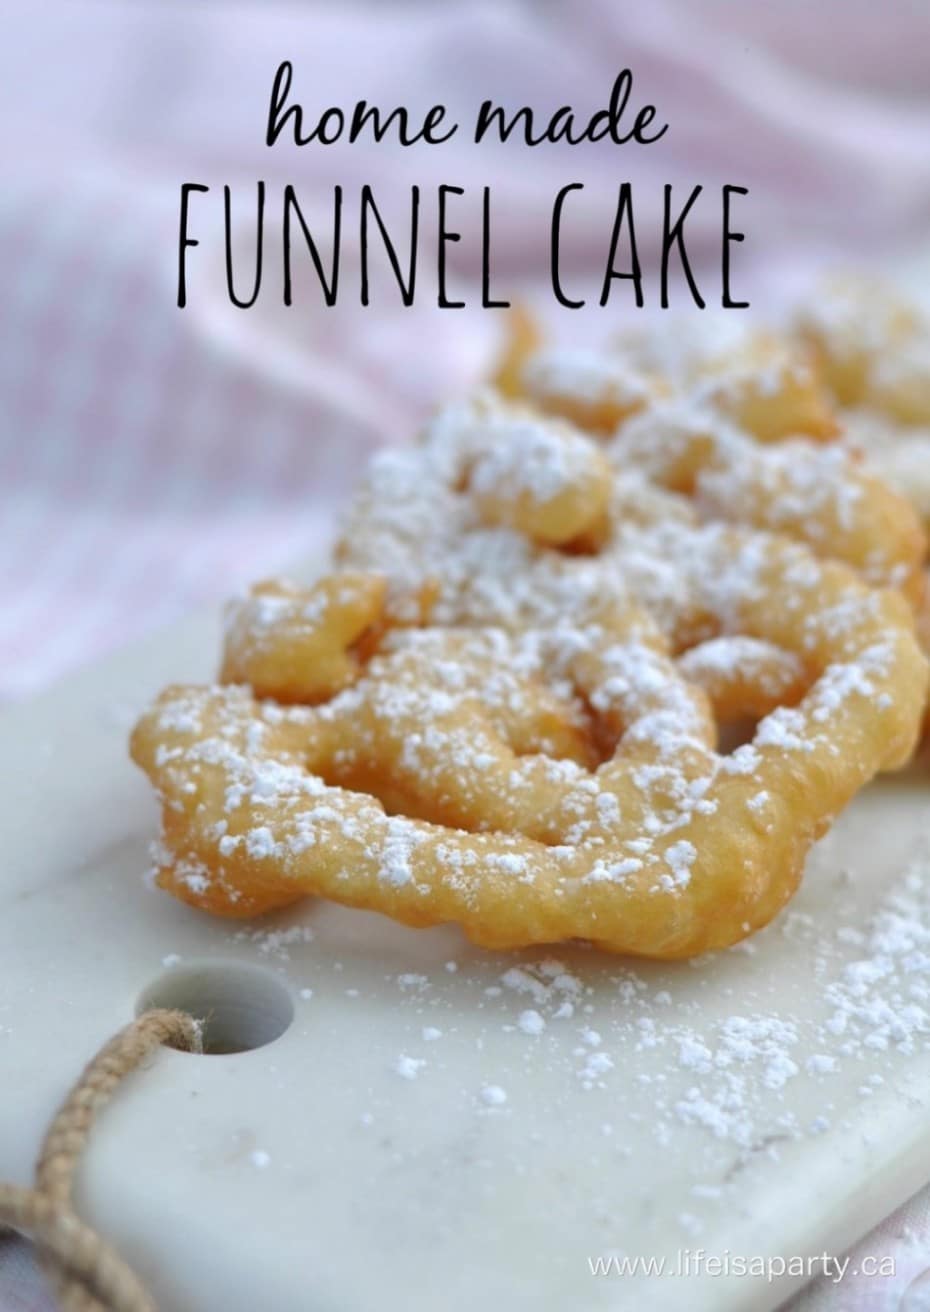 Residence made Funnel Cake Recipe -lift the carnival residence with this straight forward, cheap recipe sure to galvanize company, and remind you of a day at the magnificent.